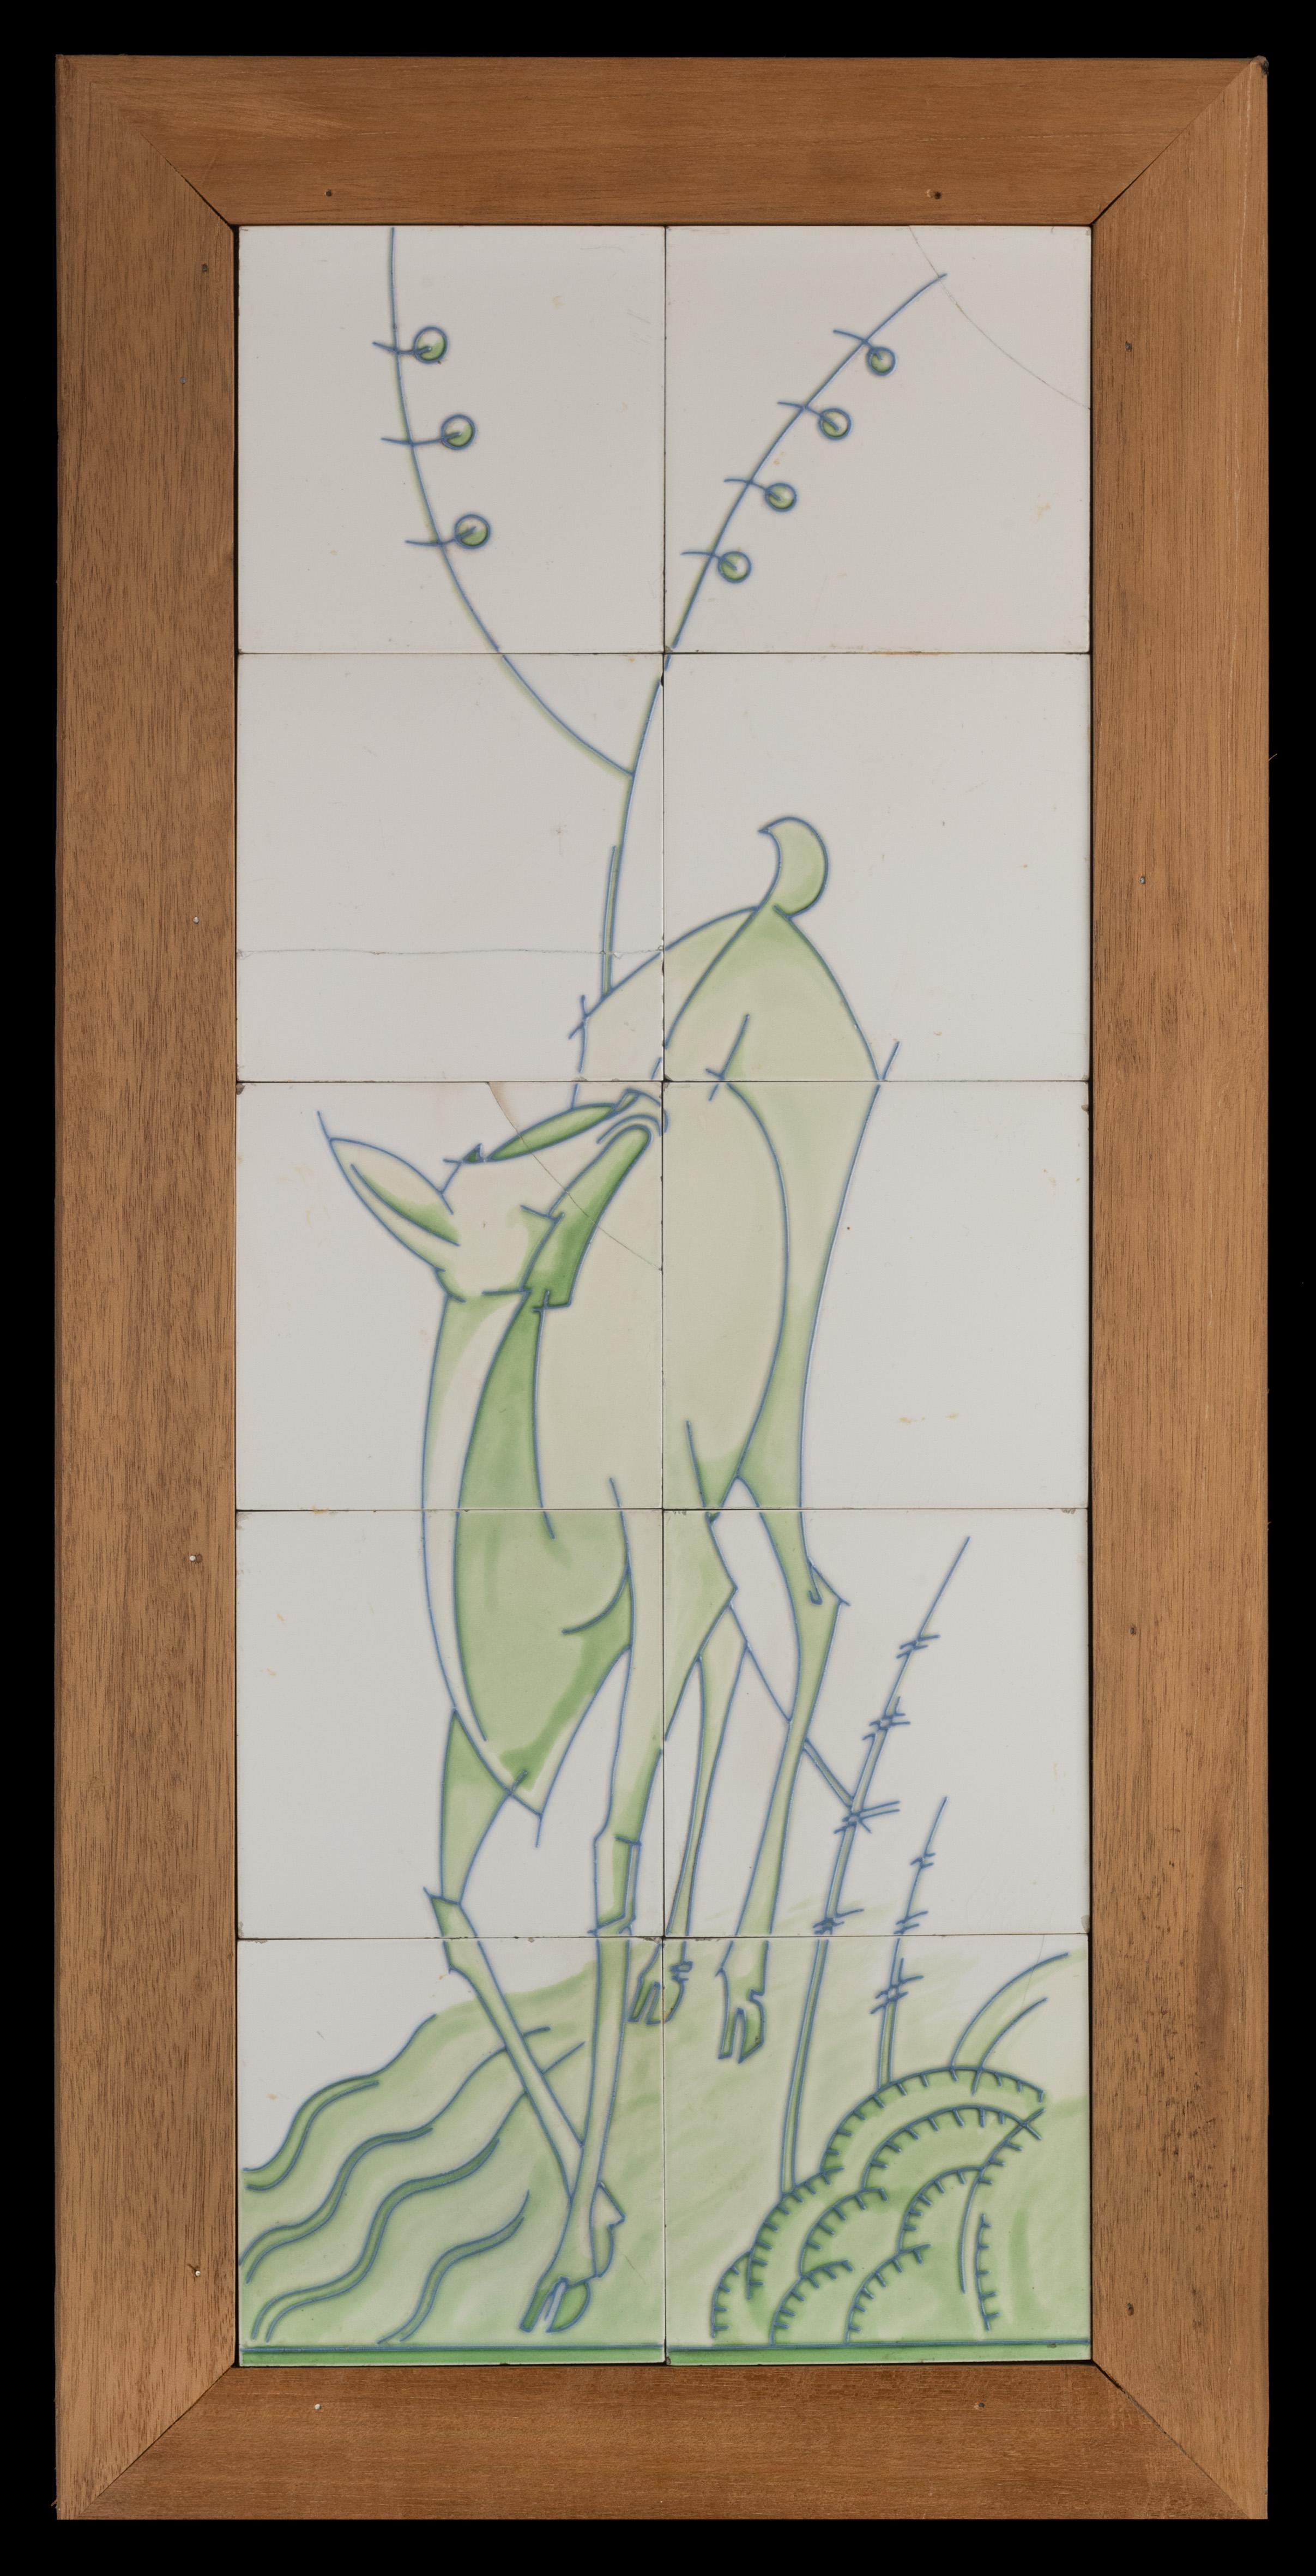 Fine Art Deco tile tableau consisting of 10 tiles, made at Manufactures Céramiques d'Hemixem Gilliot & Cie, Hemiksem around 1925. This panel, depicting a deer, is a design by Joseph Roelants (1881-1962), who worked in Hemiksem from 1919 to 1946. The